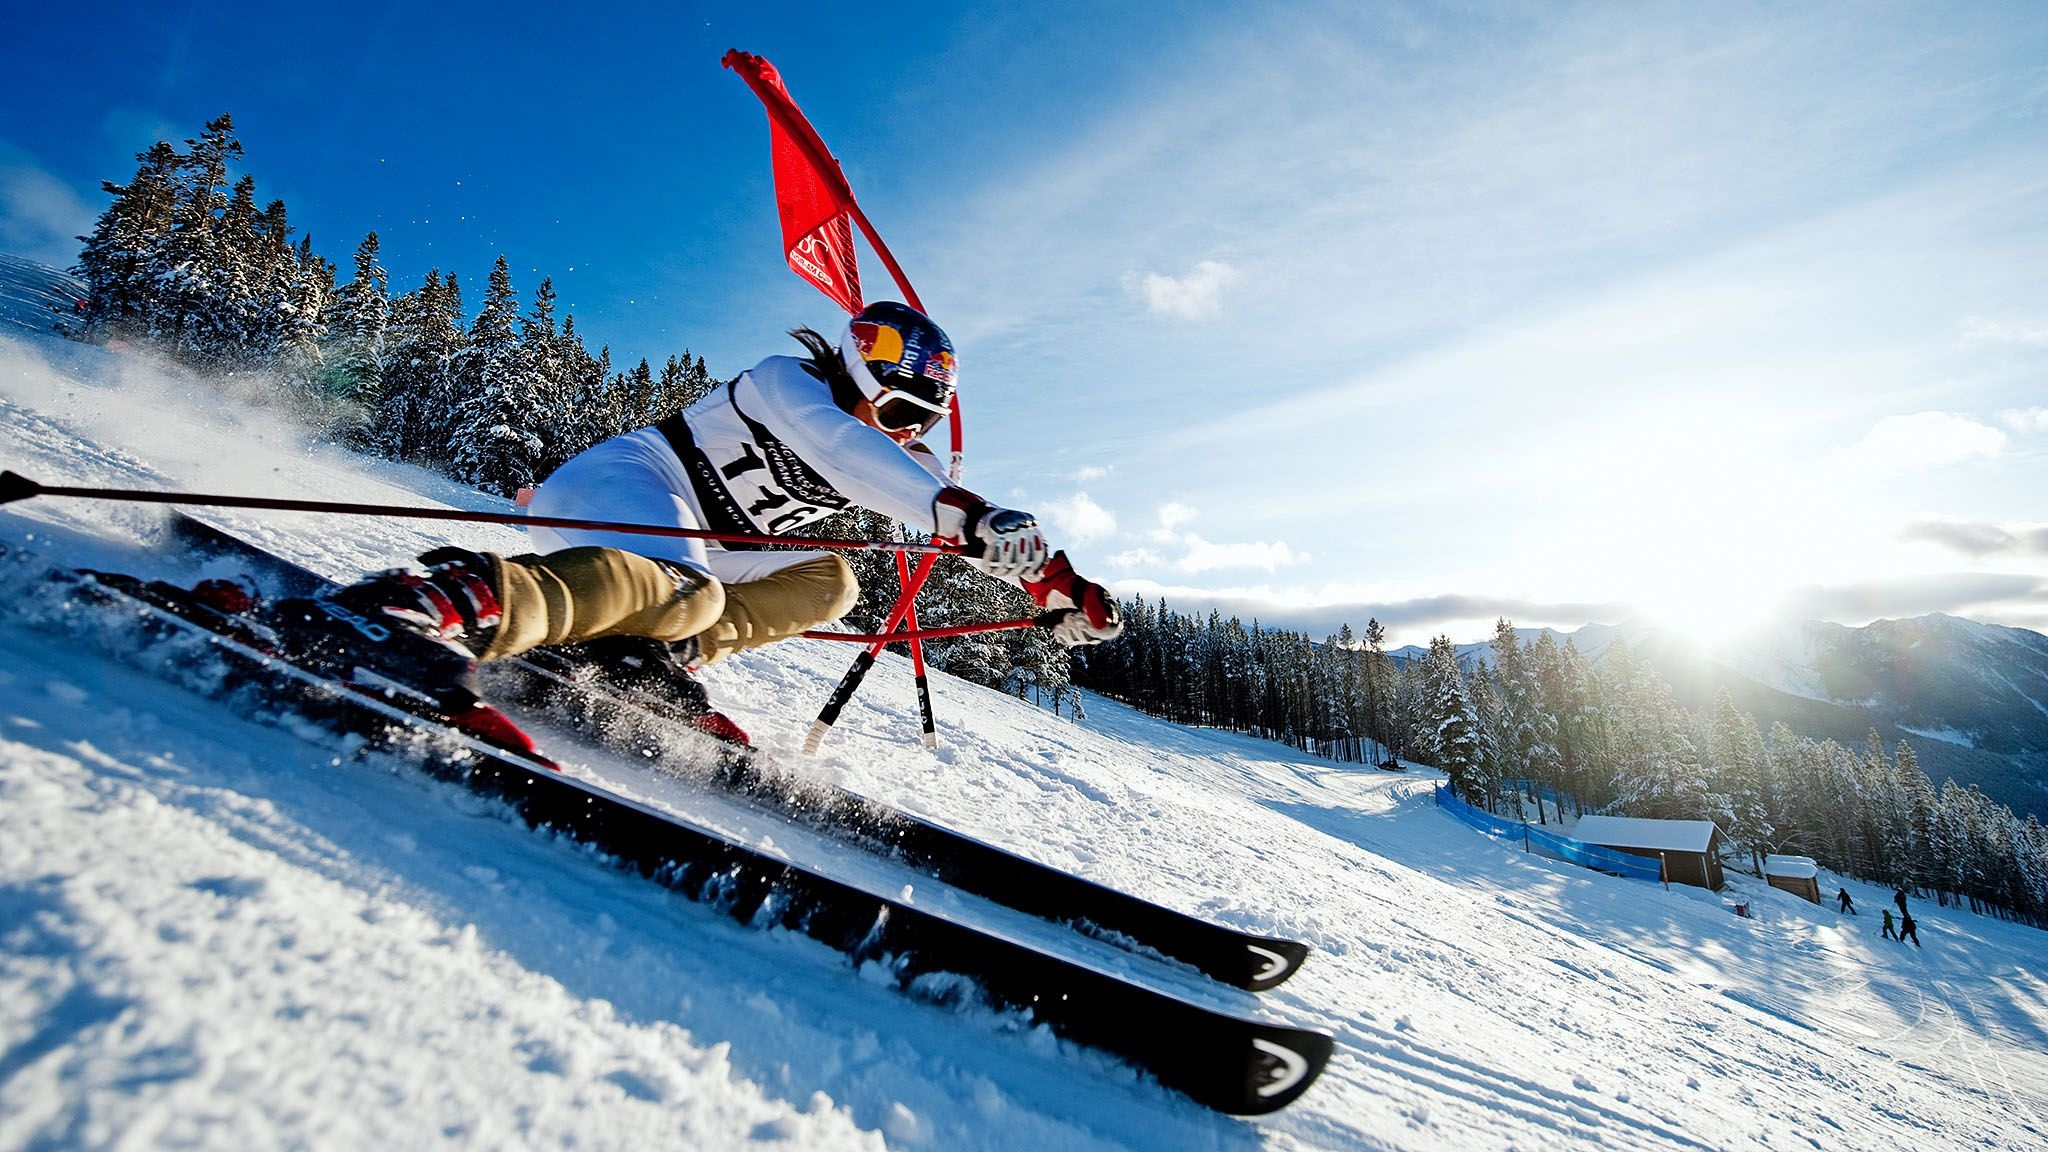 Alpine Skiing: The sport of gliding on snow, Downhill between obstacles, Winter activity. 2050x1160 HD Background.